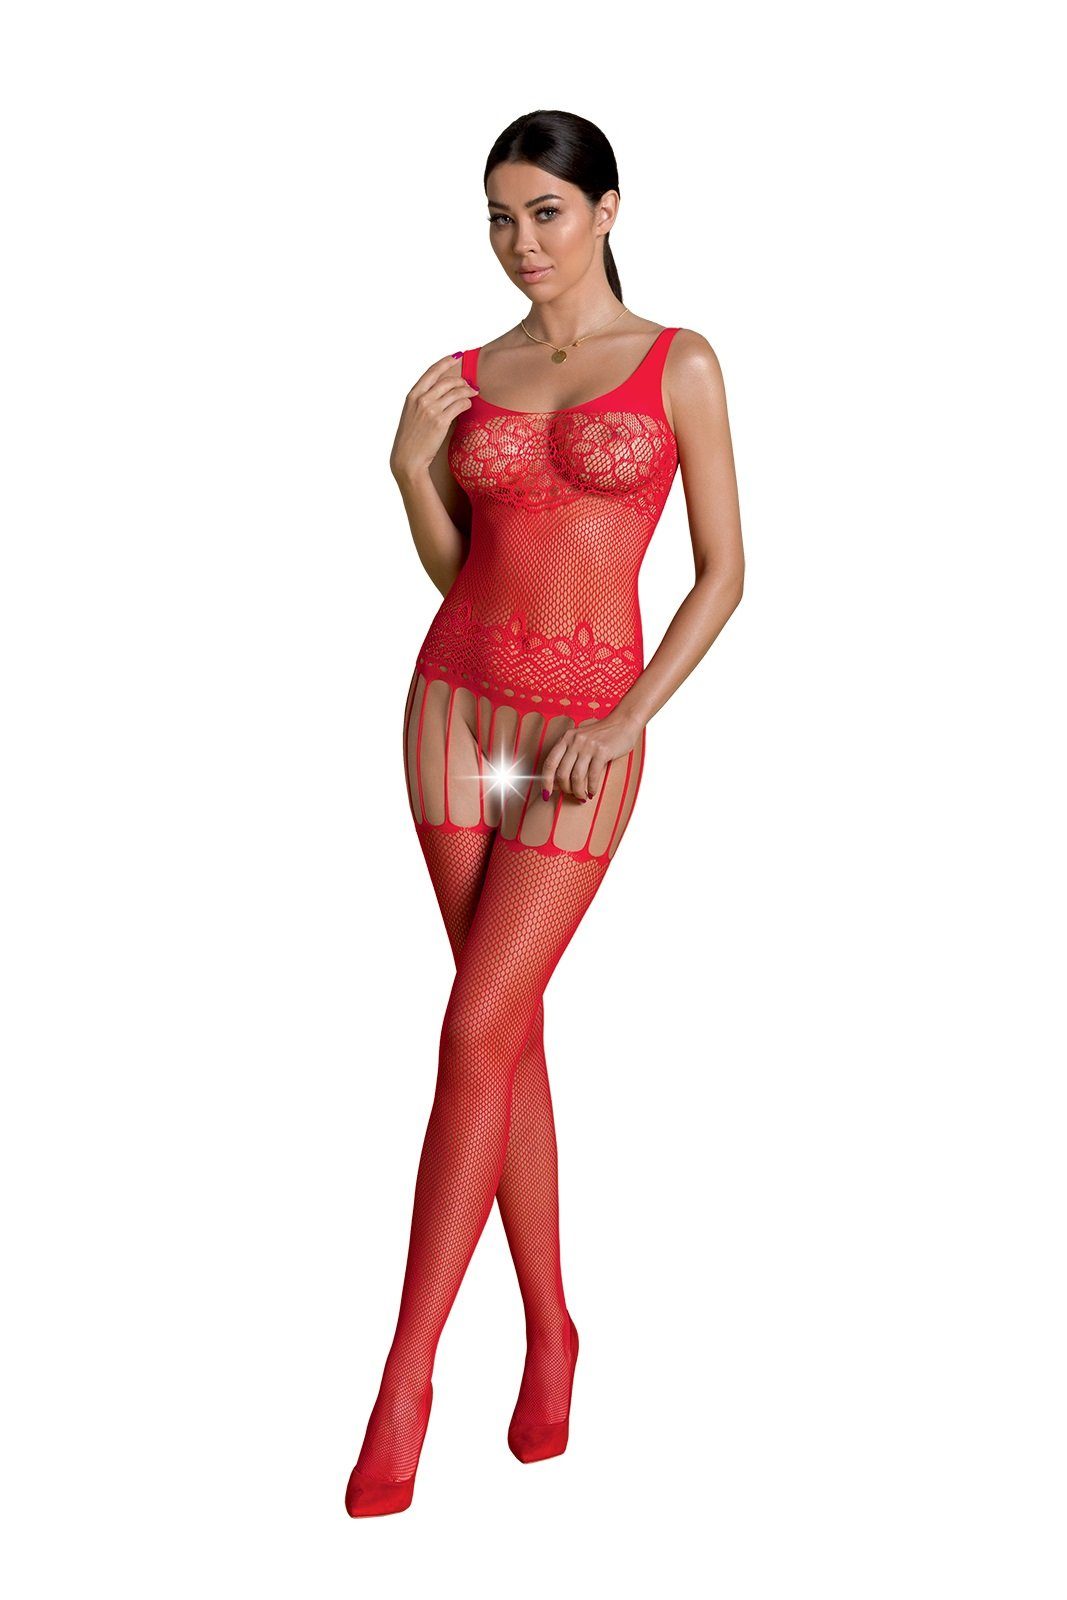 Bodystocking DEN Passion Collection rot Passion St) (1 20 Bodystocking Netz Eco Catsuit ouvert transparent